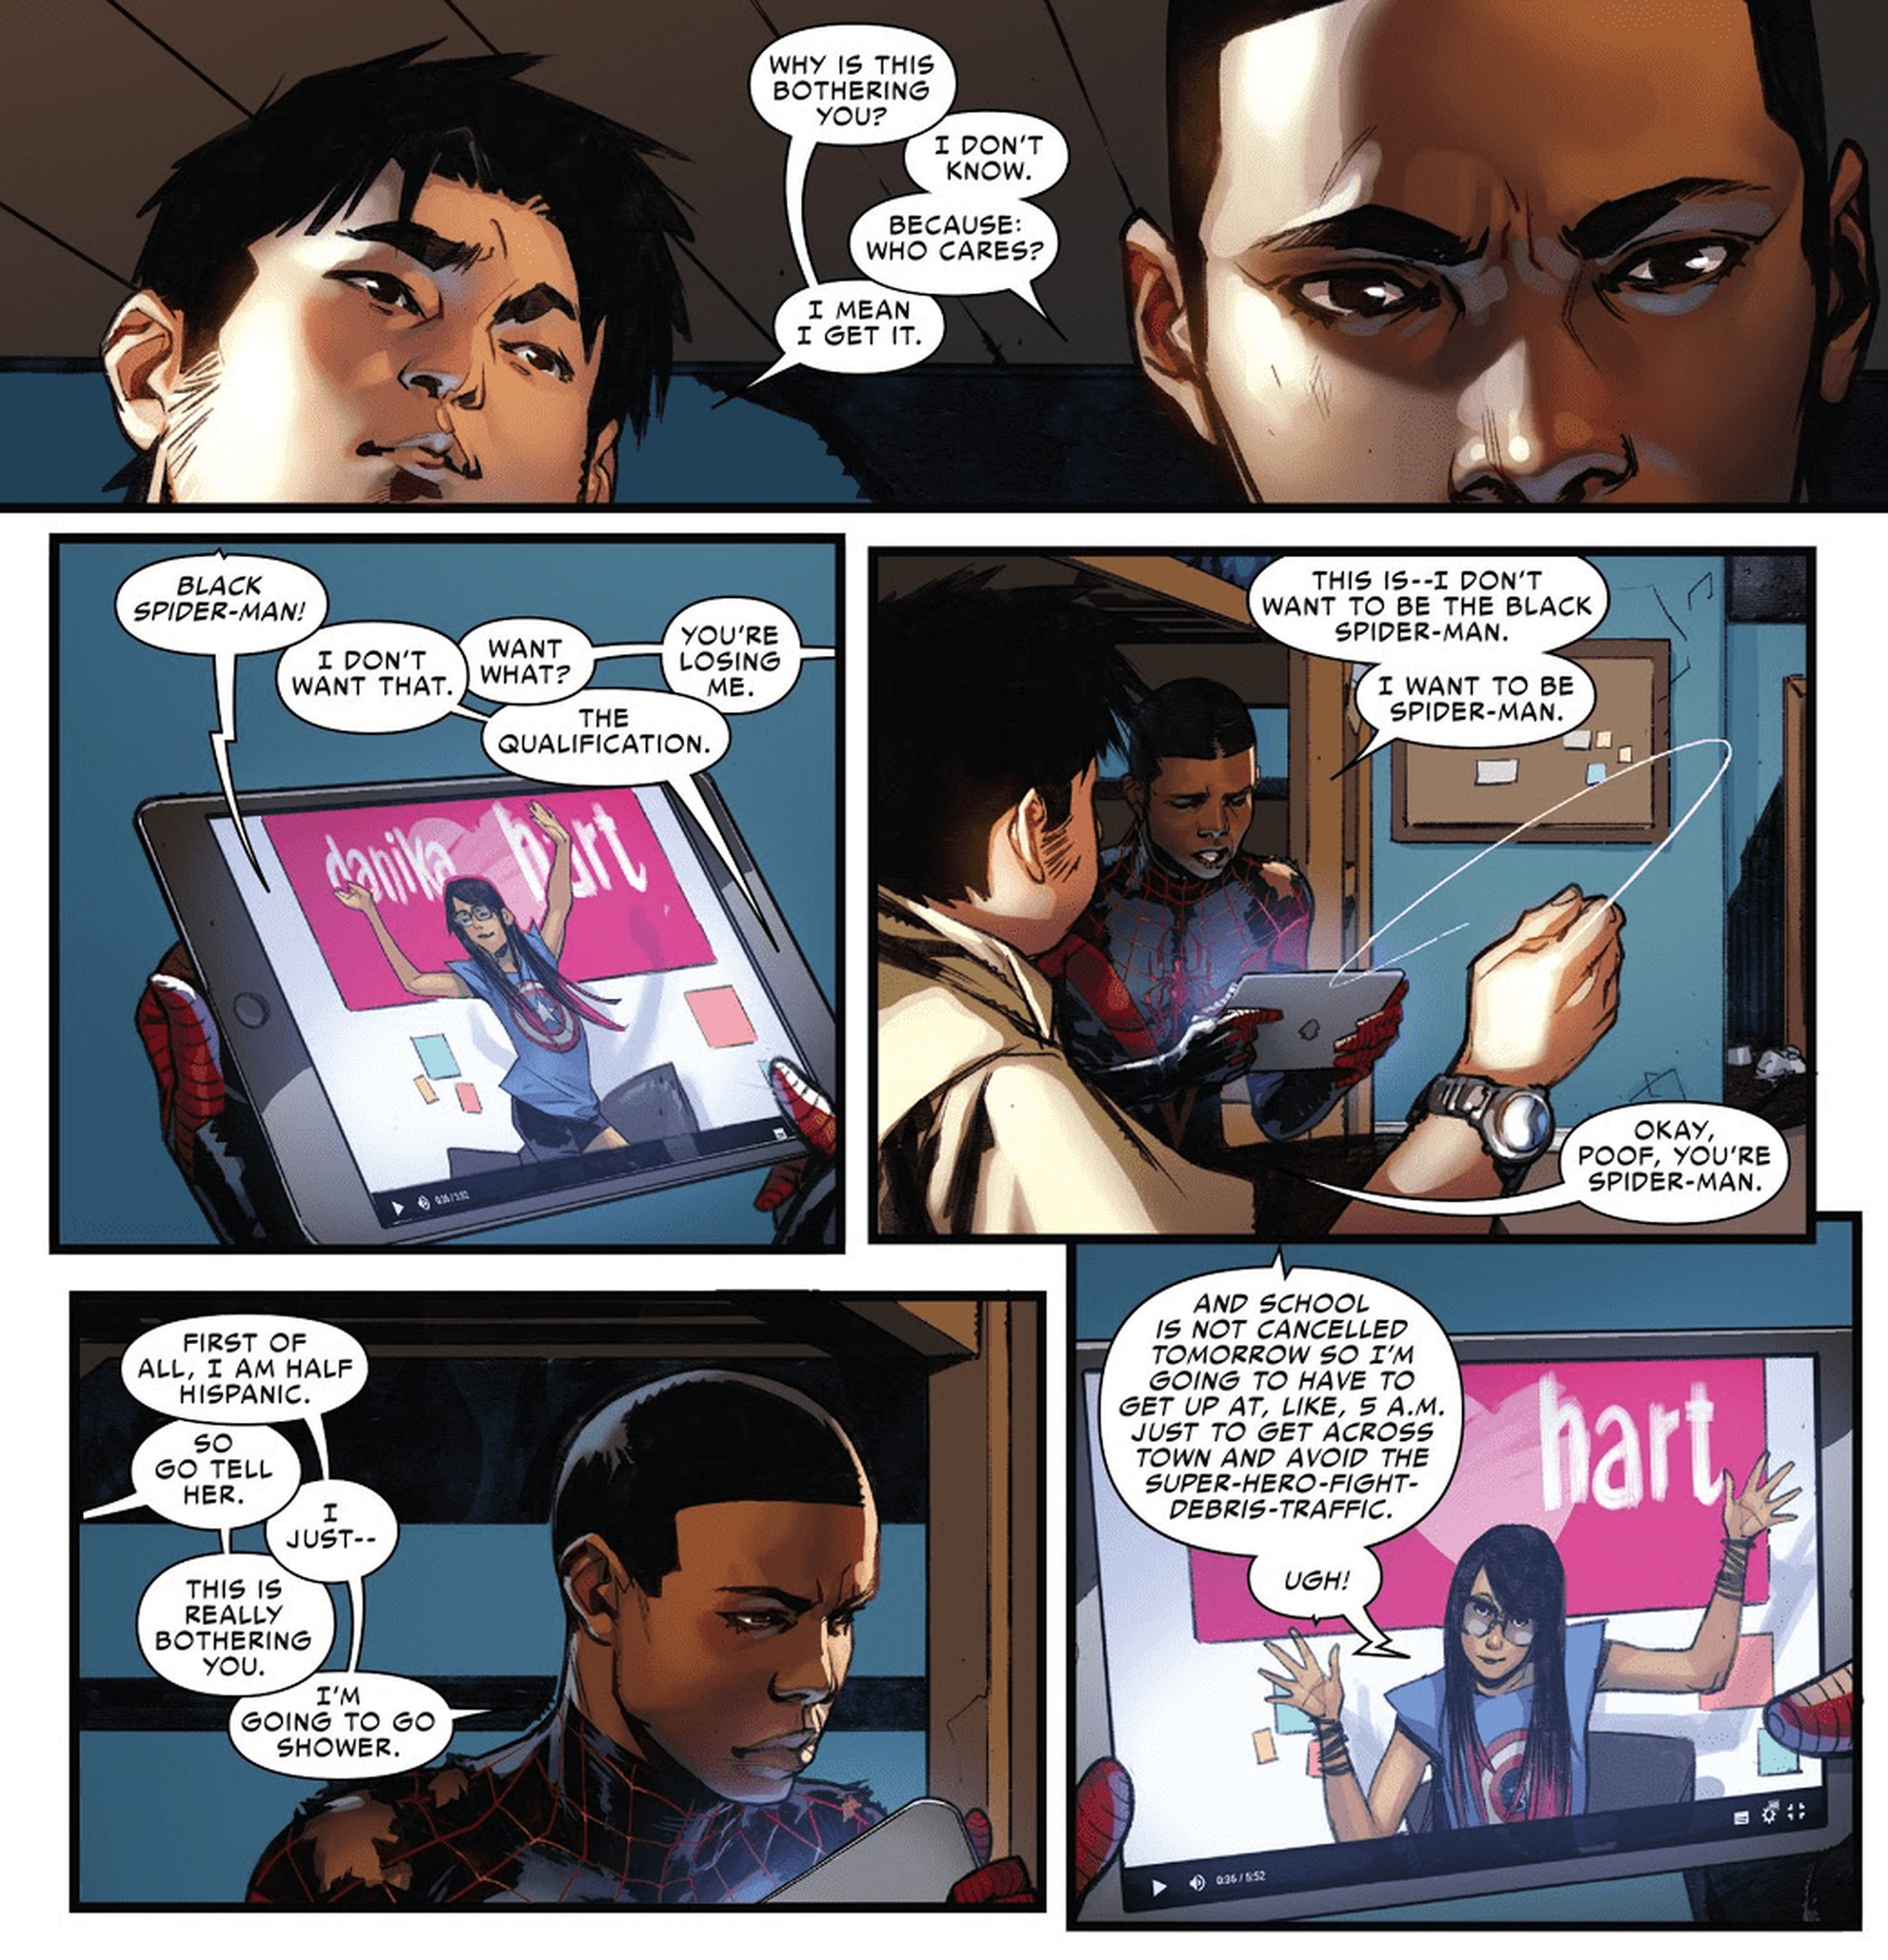 Miles and Ganke watching a streamer discuss the new Spider-Man in Spider-Man Vol. 2, No. 2.